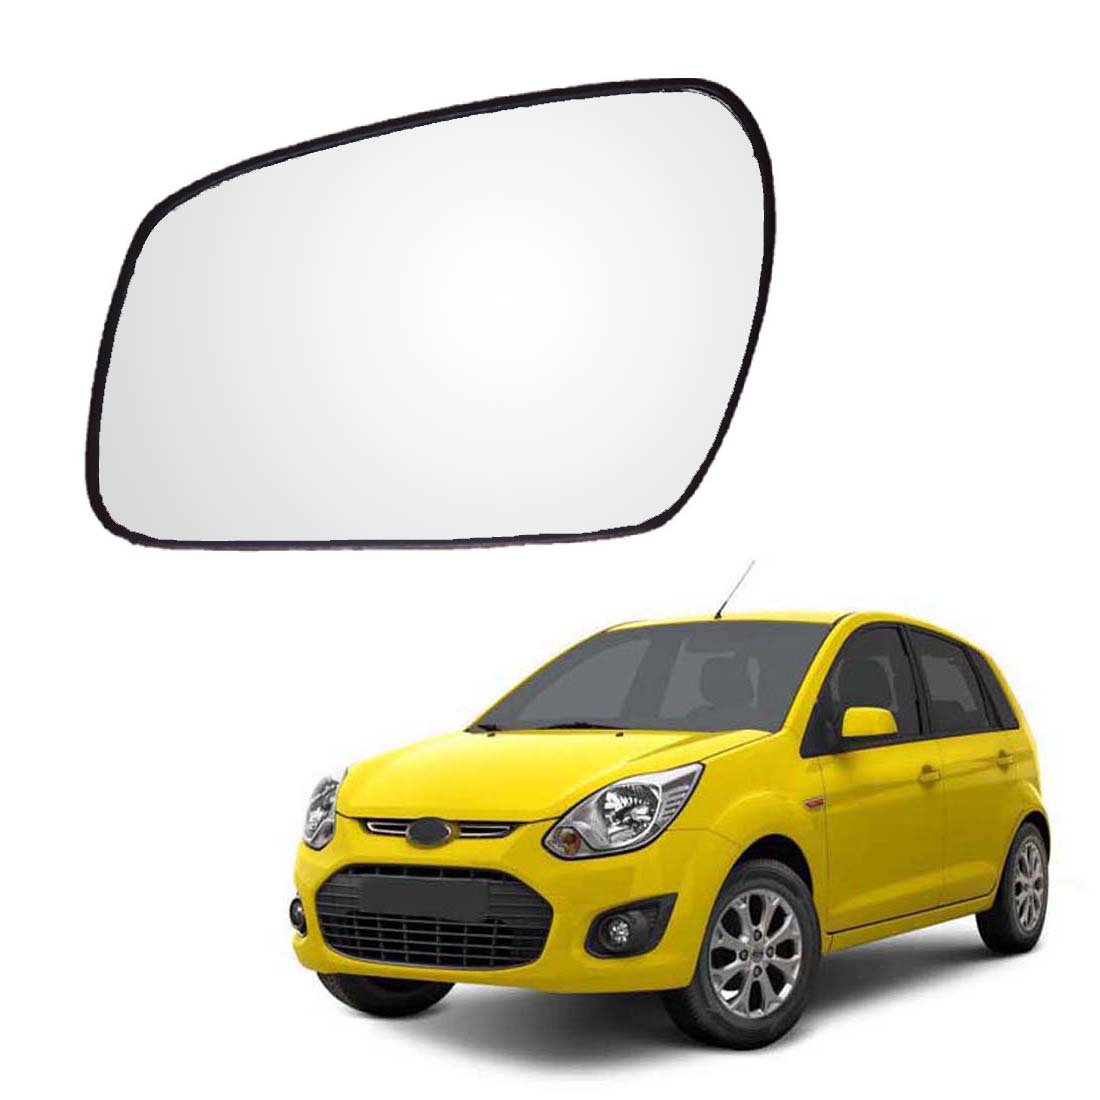 Ford Grand C-Max Mk2 exterior mirror glass front right LHD 2063586 NEW  ORIGINAL